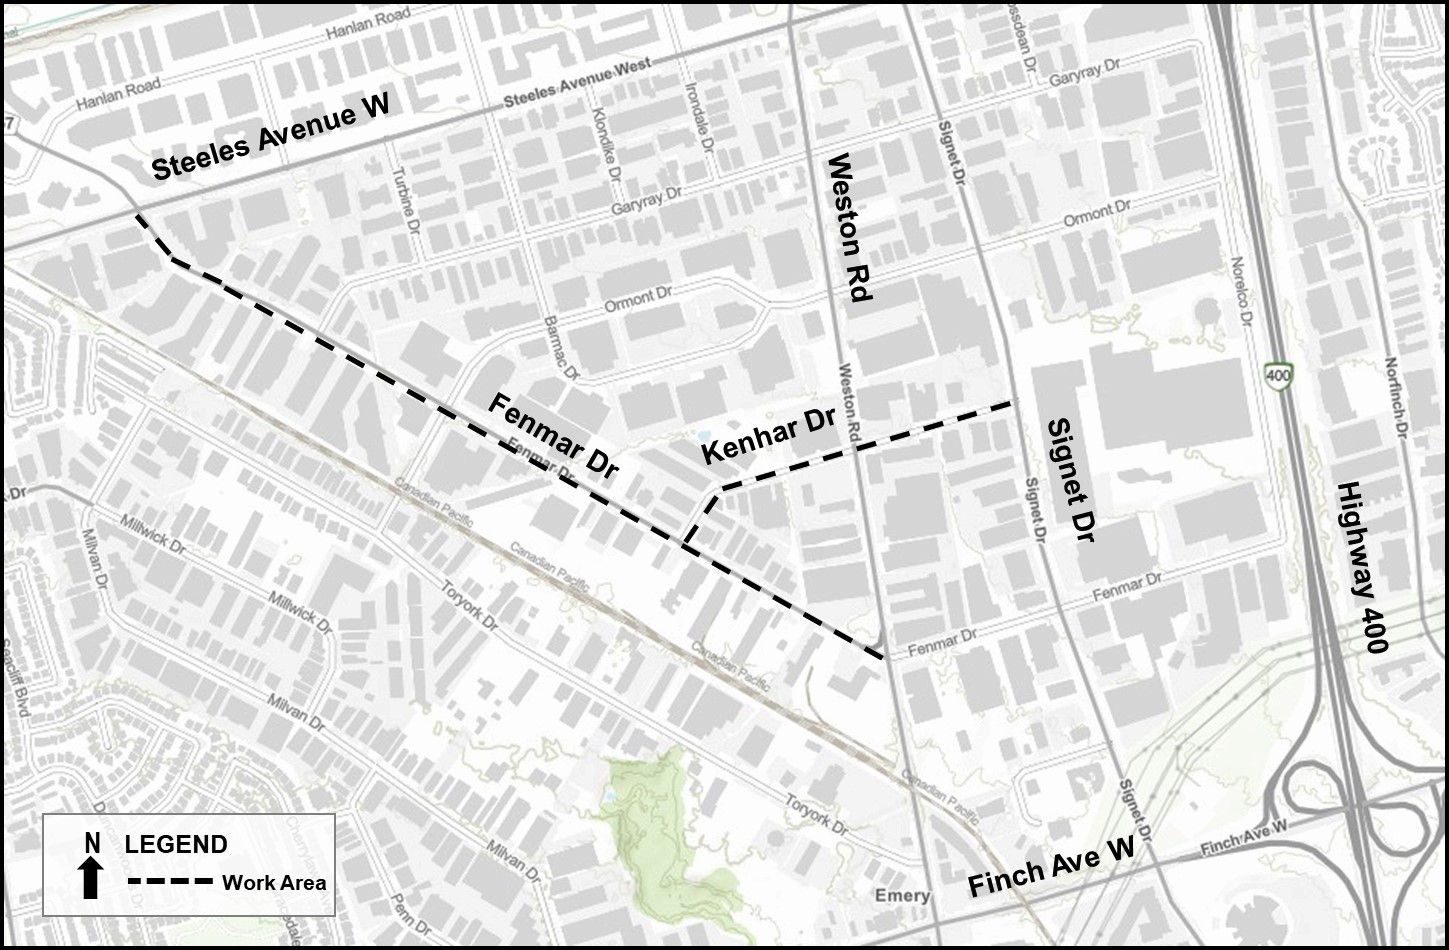 Map of project area, highlighting Fenmark Drive from Steeles Avenue West to Weston Road and Kenhar Drive